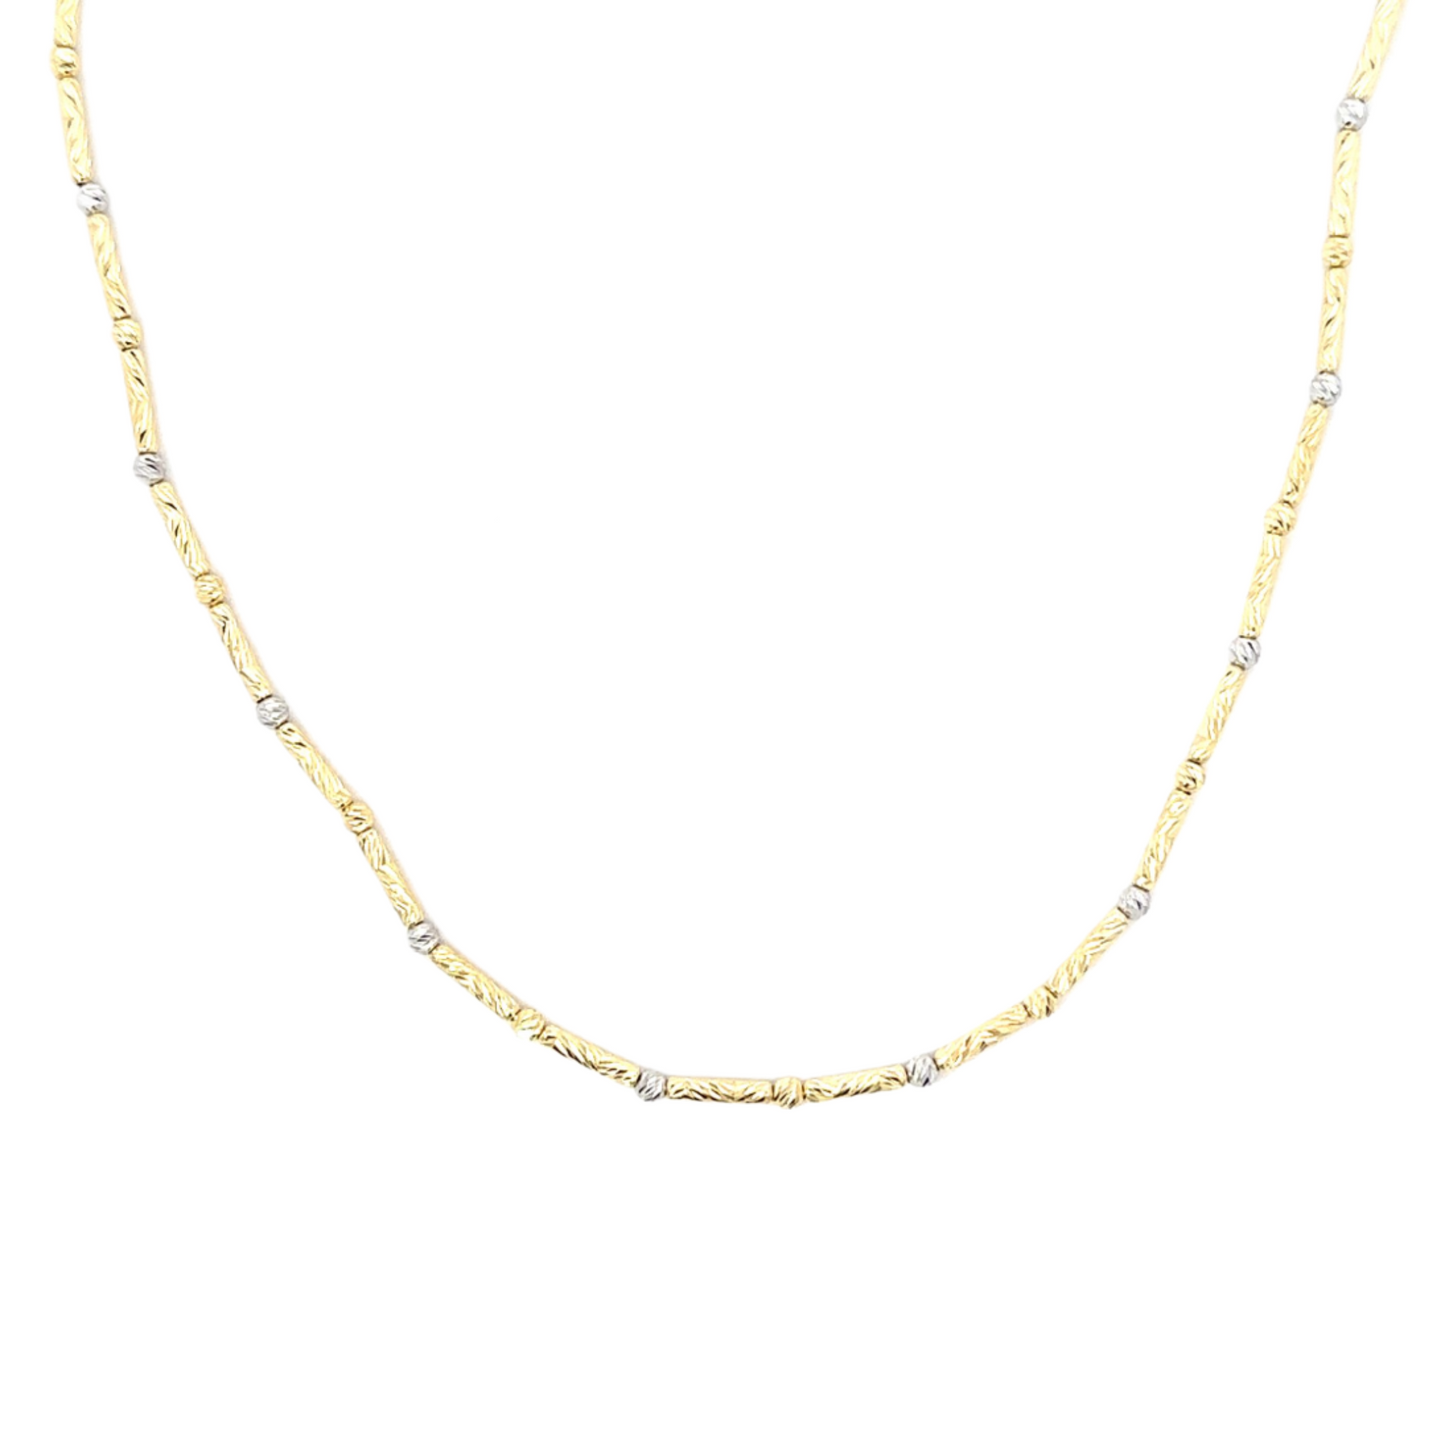 Yellow and White Gold Sparkly Bar and Bead Chain Necklace